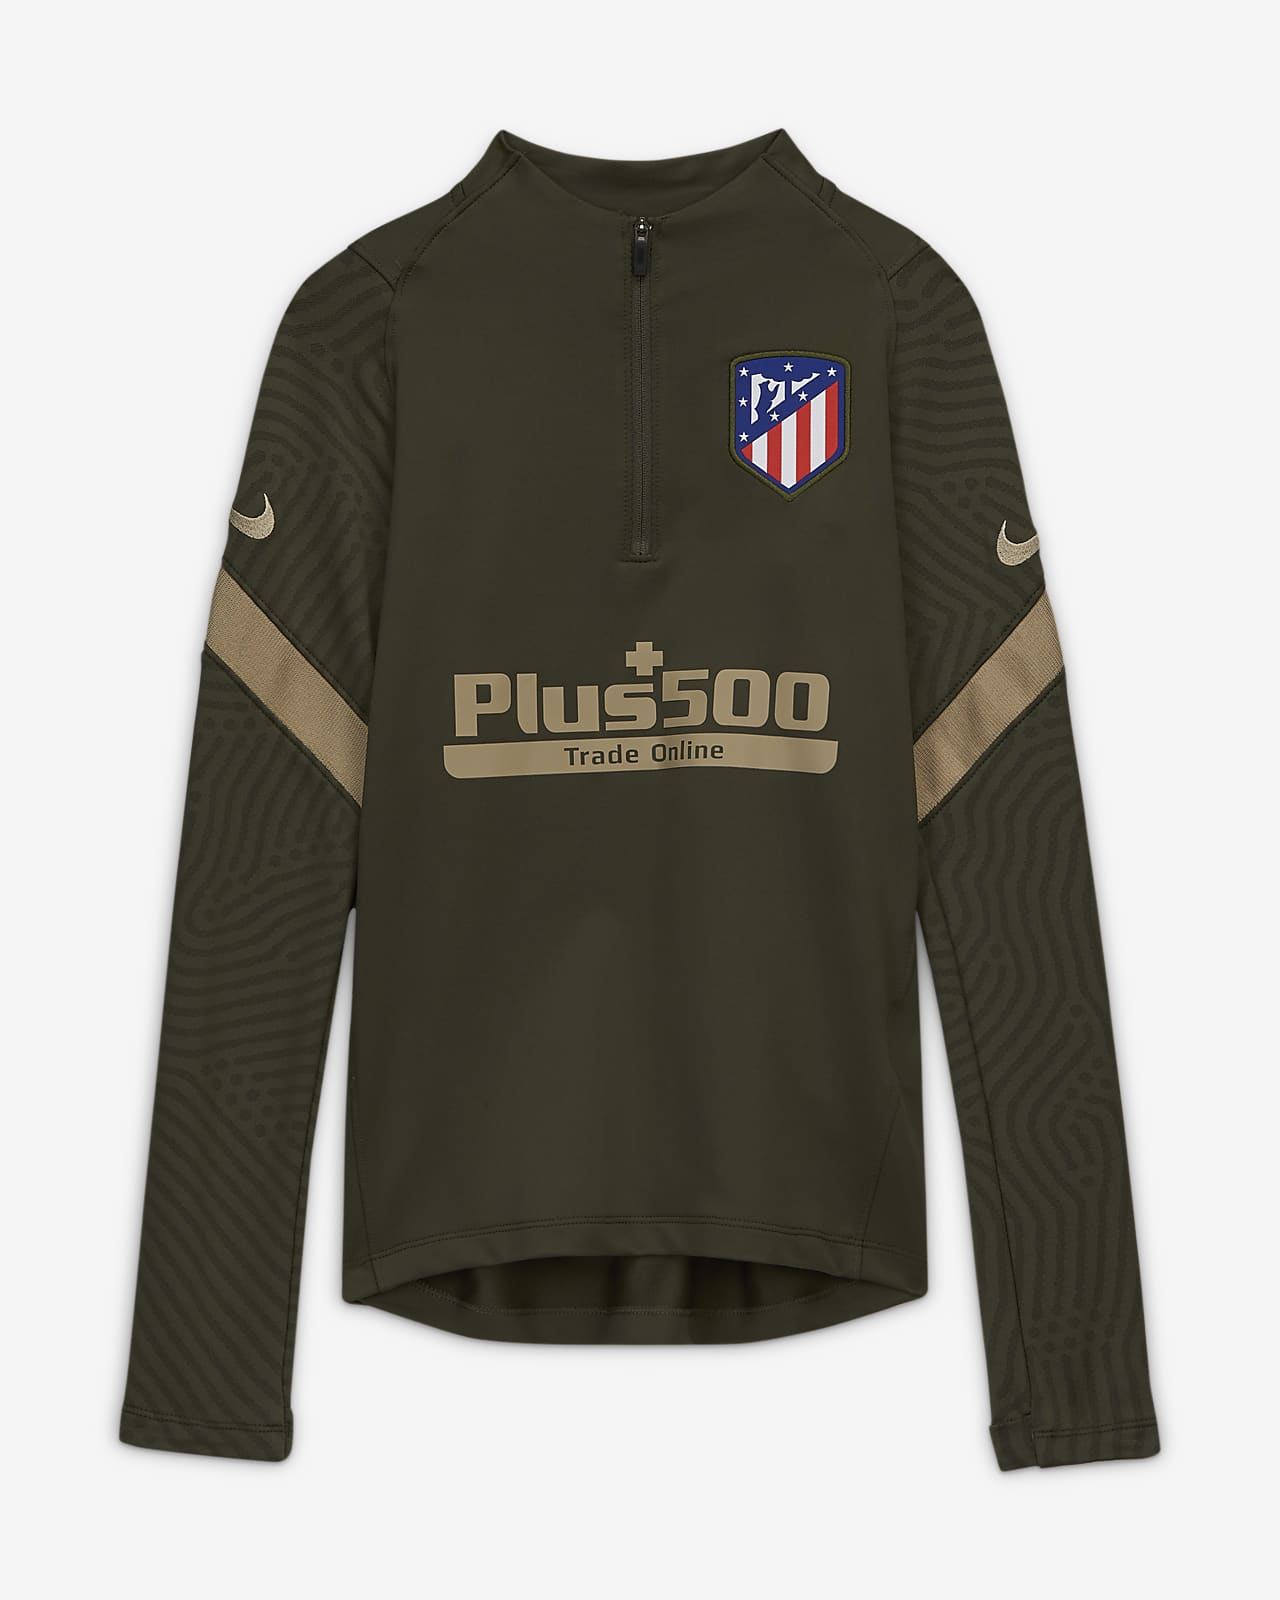 atletico madrid drill top